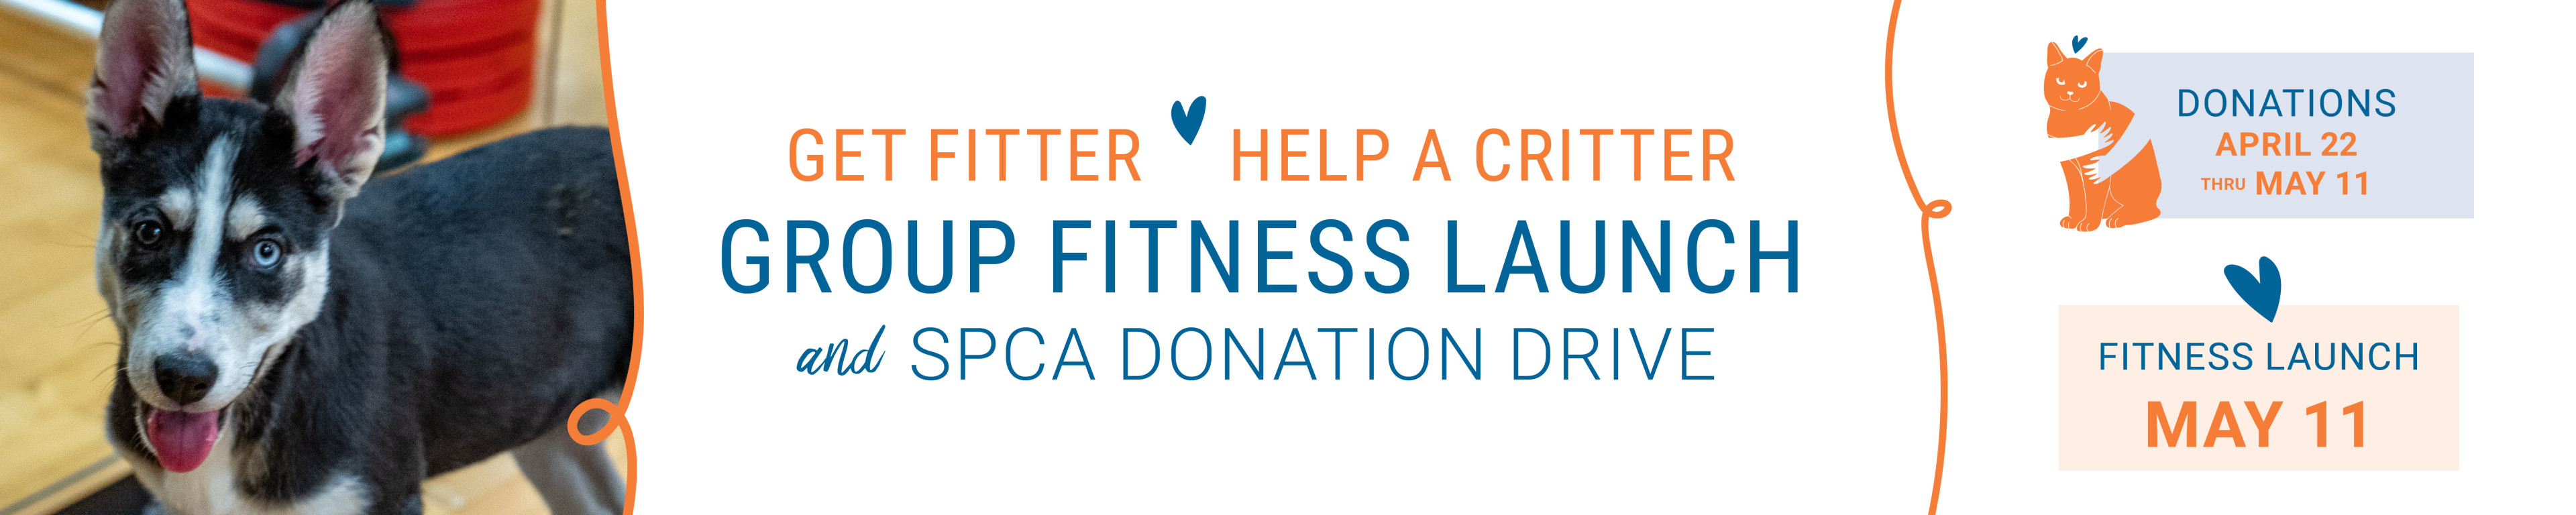 Get Fitter, Help a Critter at West Hills Athletic Club's Group Fitness Launch and SPCA Donation Drive